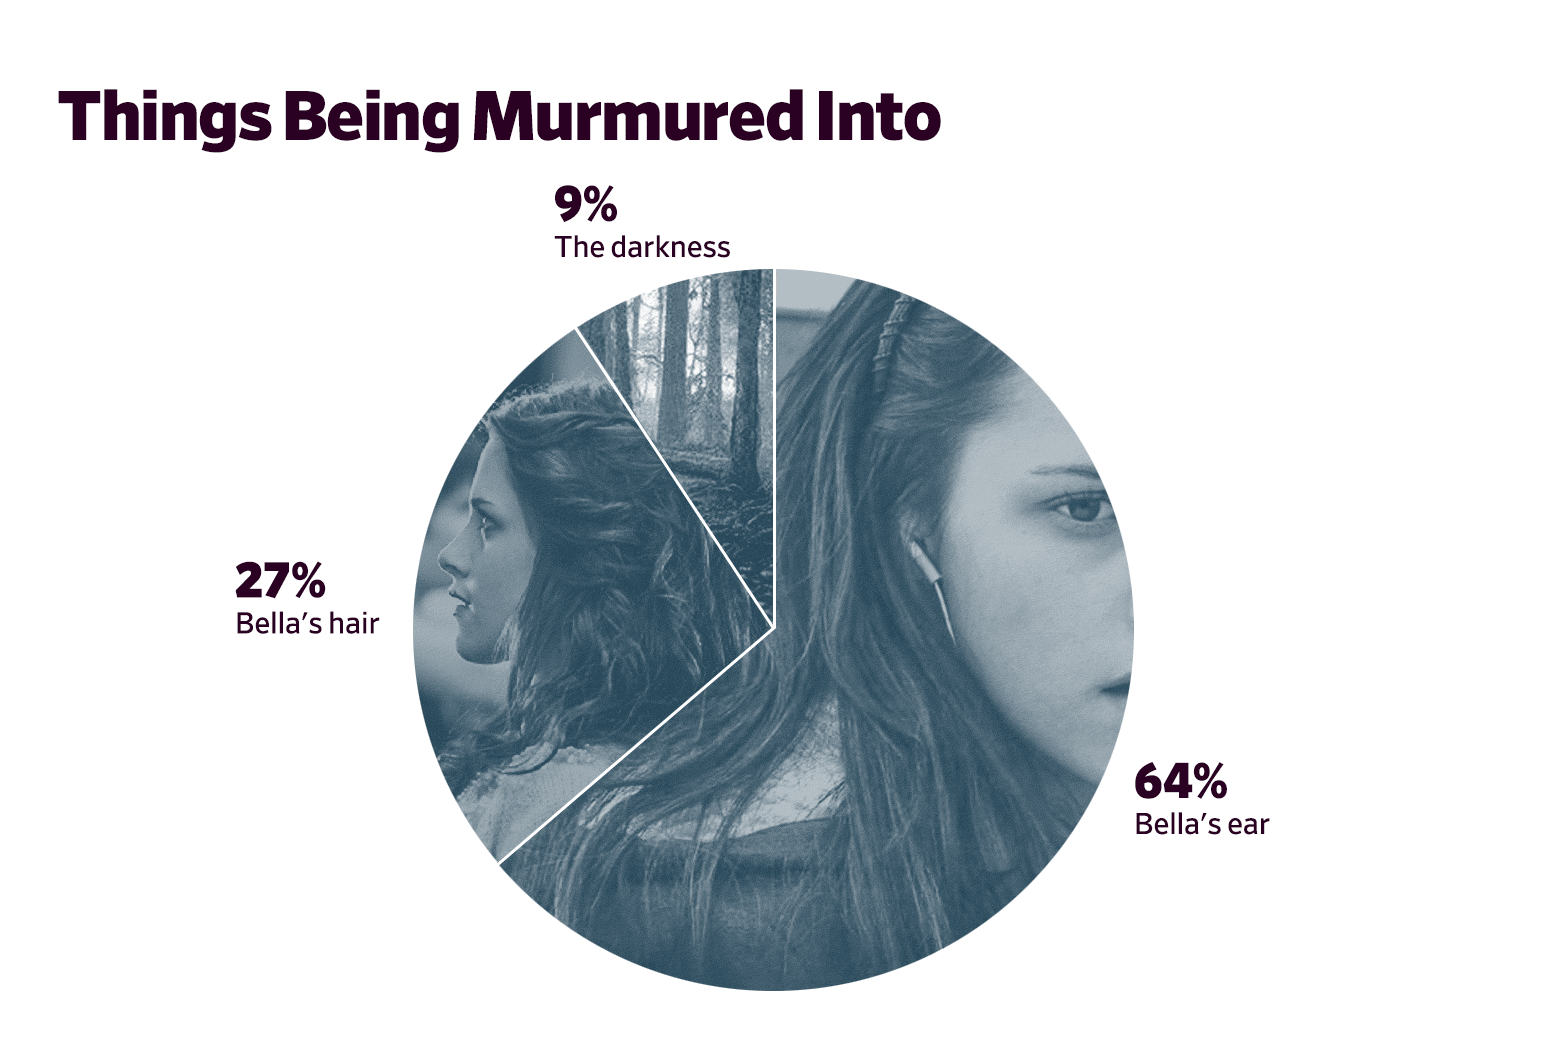 A pie chart showing that Bella's ear accounts for 64 percent of things murmured into, her hair 27 percent, and the darkness 9 percent of the time